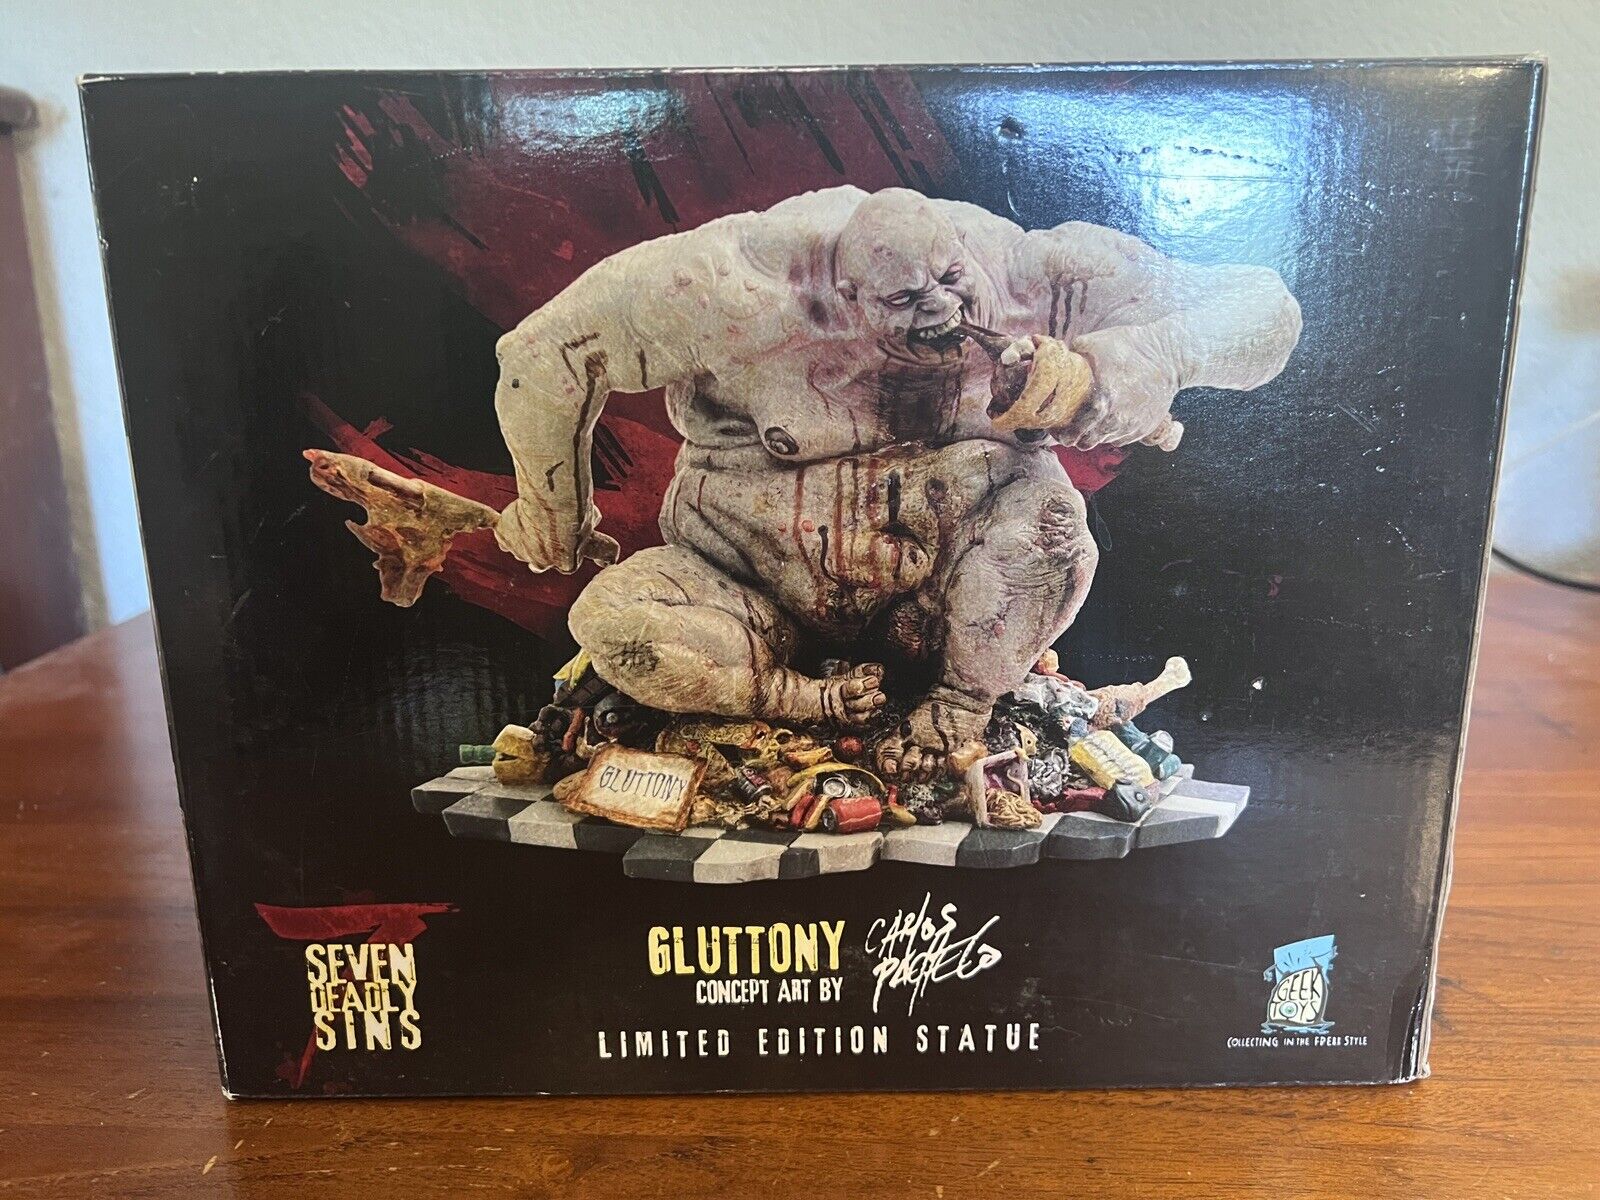 Geek Toys Gluttony Statue #144/500 & Carlos Pacheco Concept Art 7 Deadly Sins